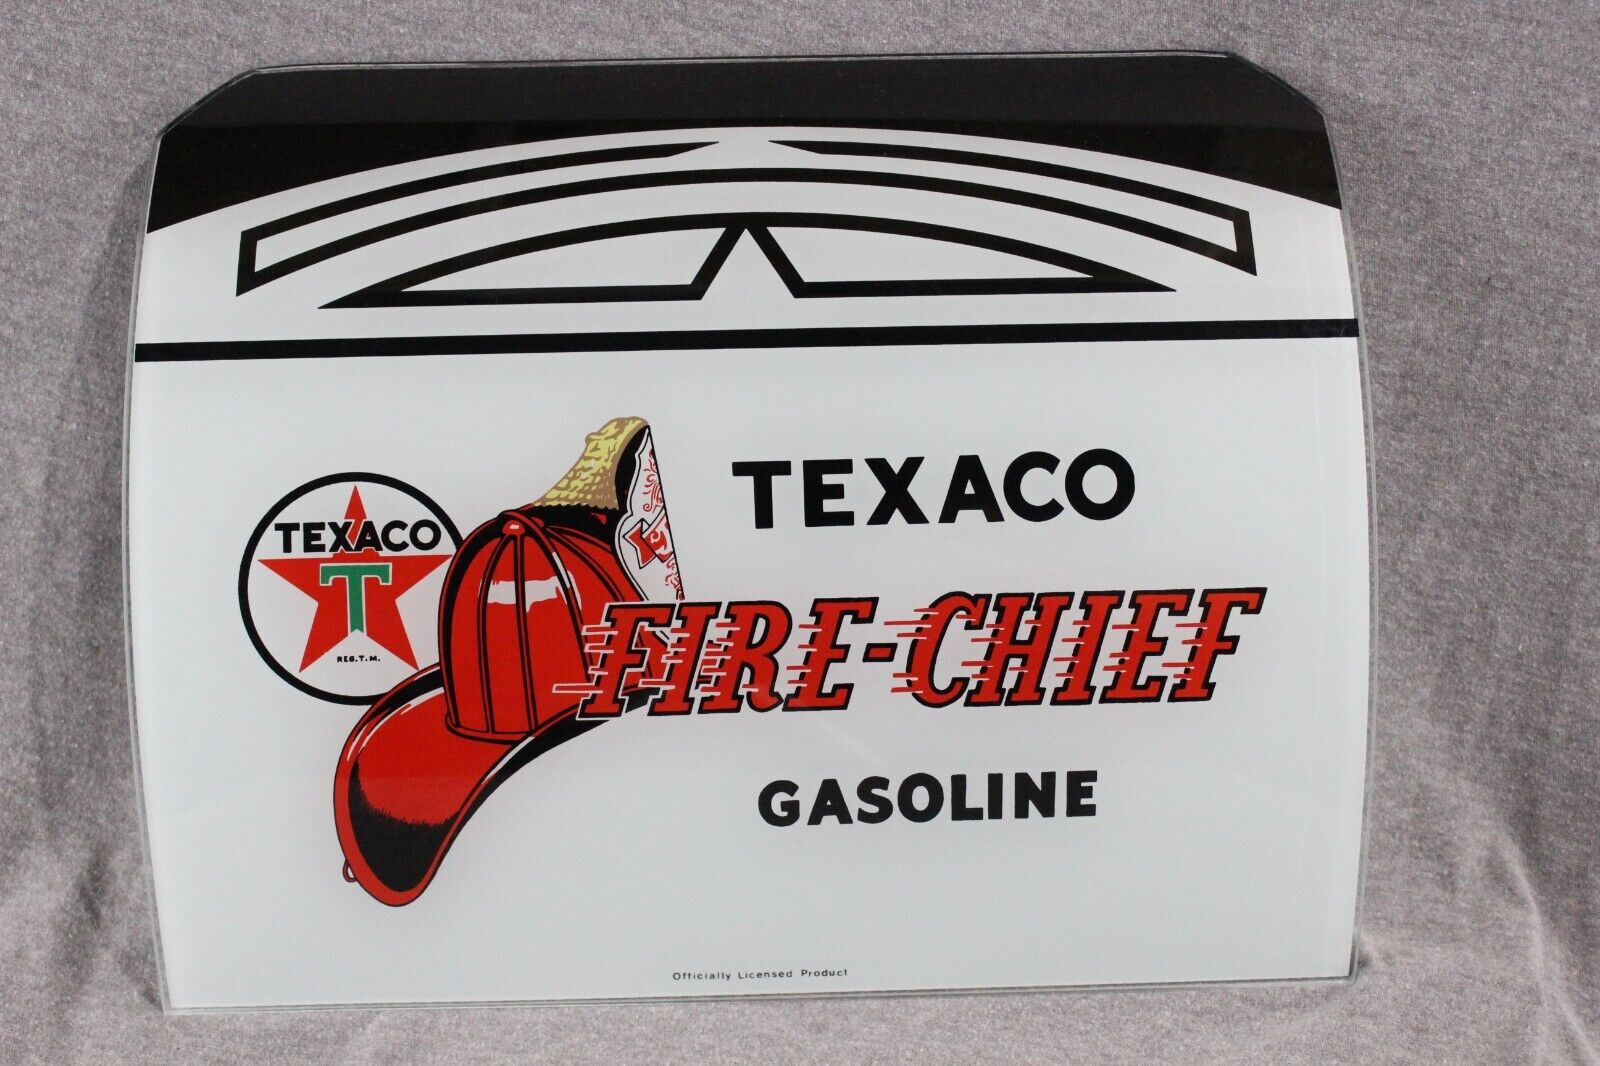 NATIONAL A38 TEXACO FIRE CHIEF ADVERTISEMENT GLASS